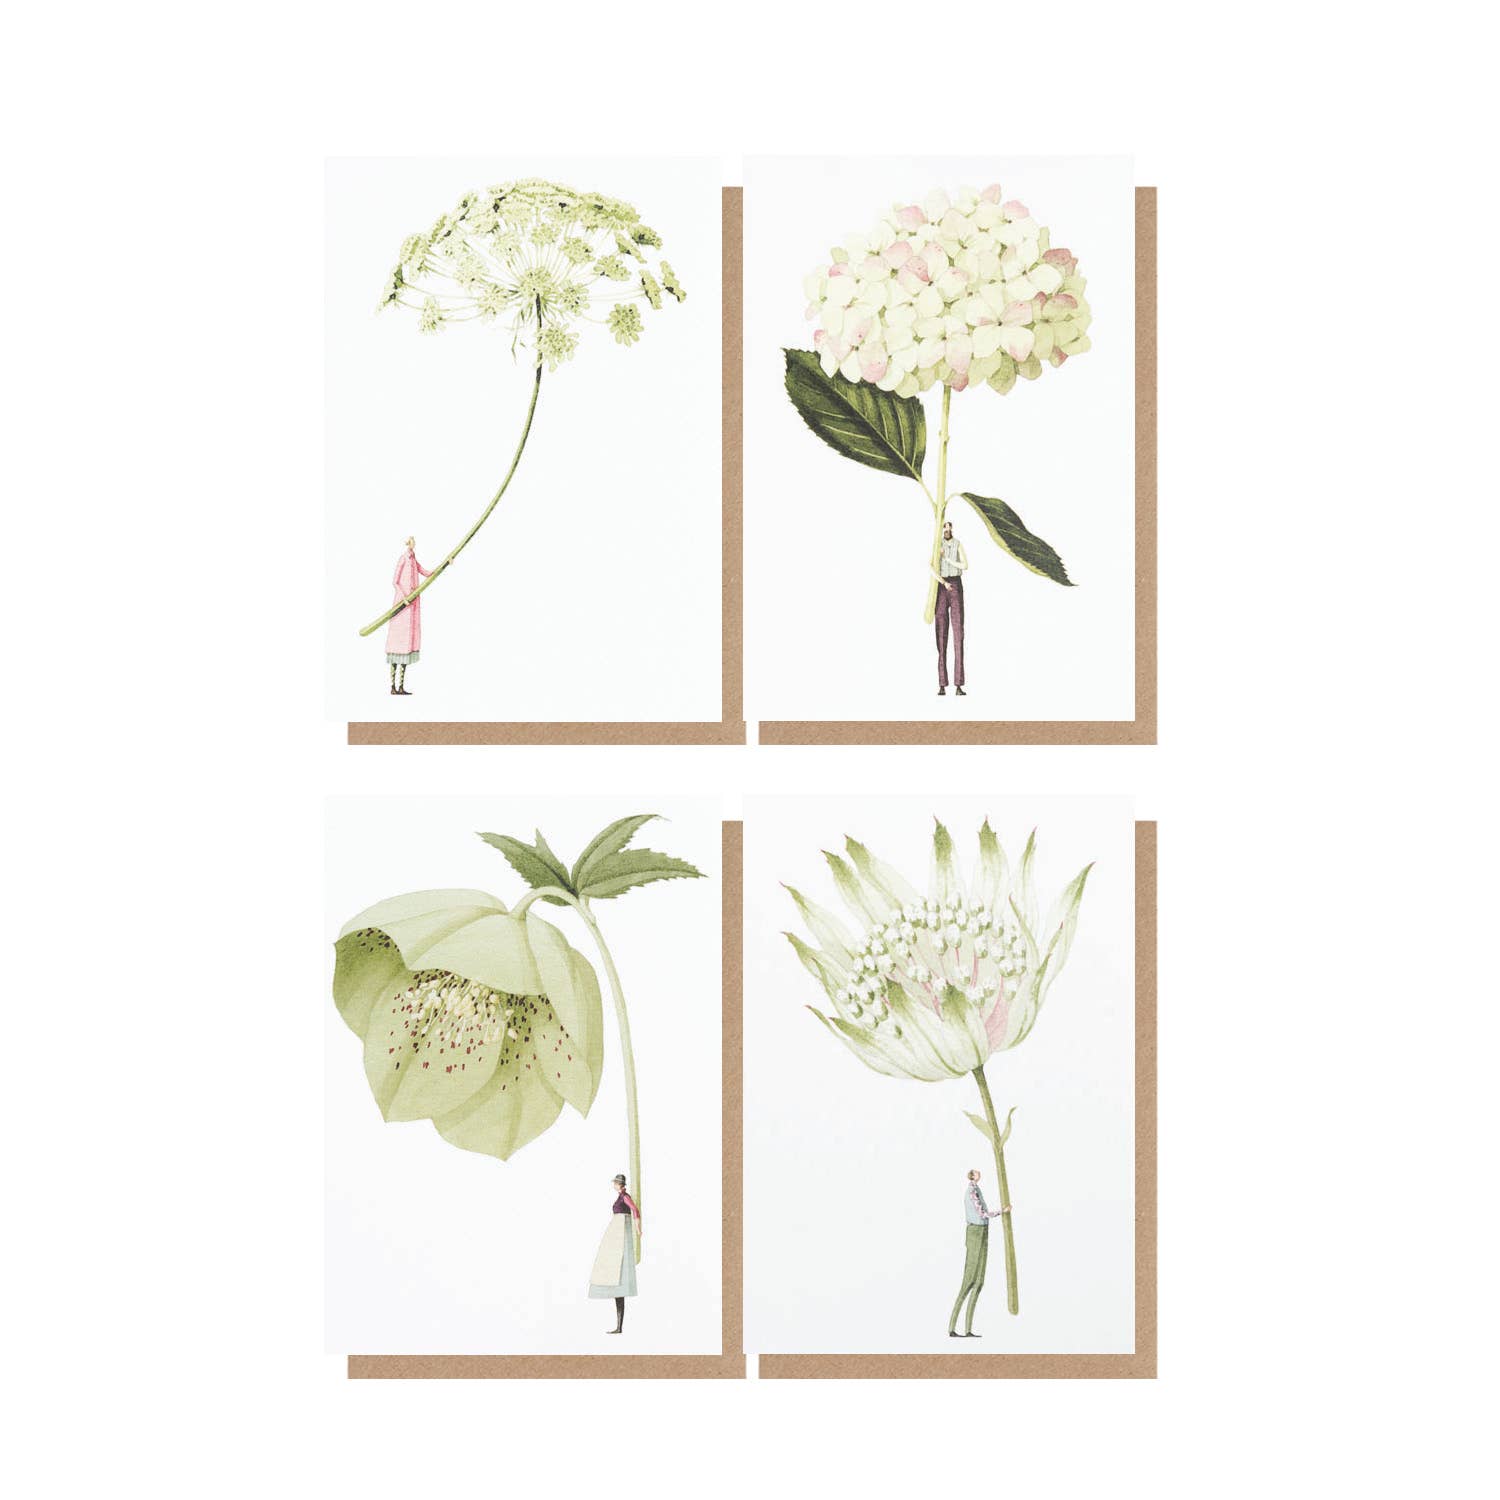 In Bloom - “Green” 8 Cards Box Set